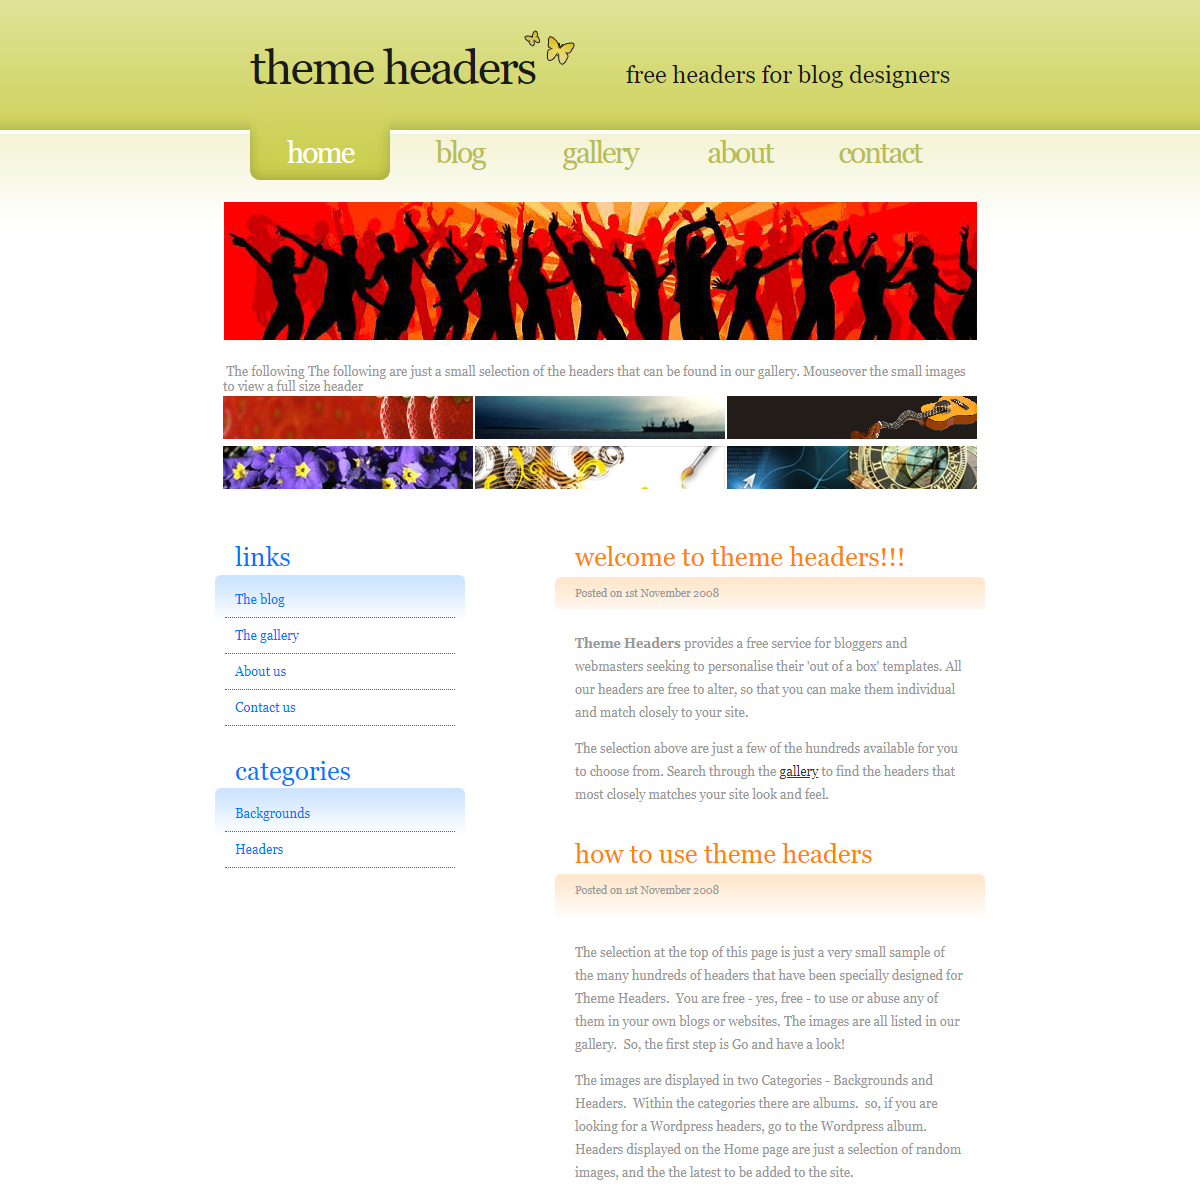 A complete backup of http://themeheaders.com/